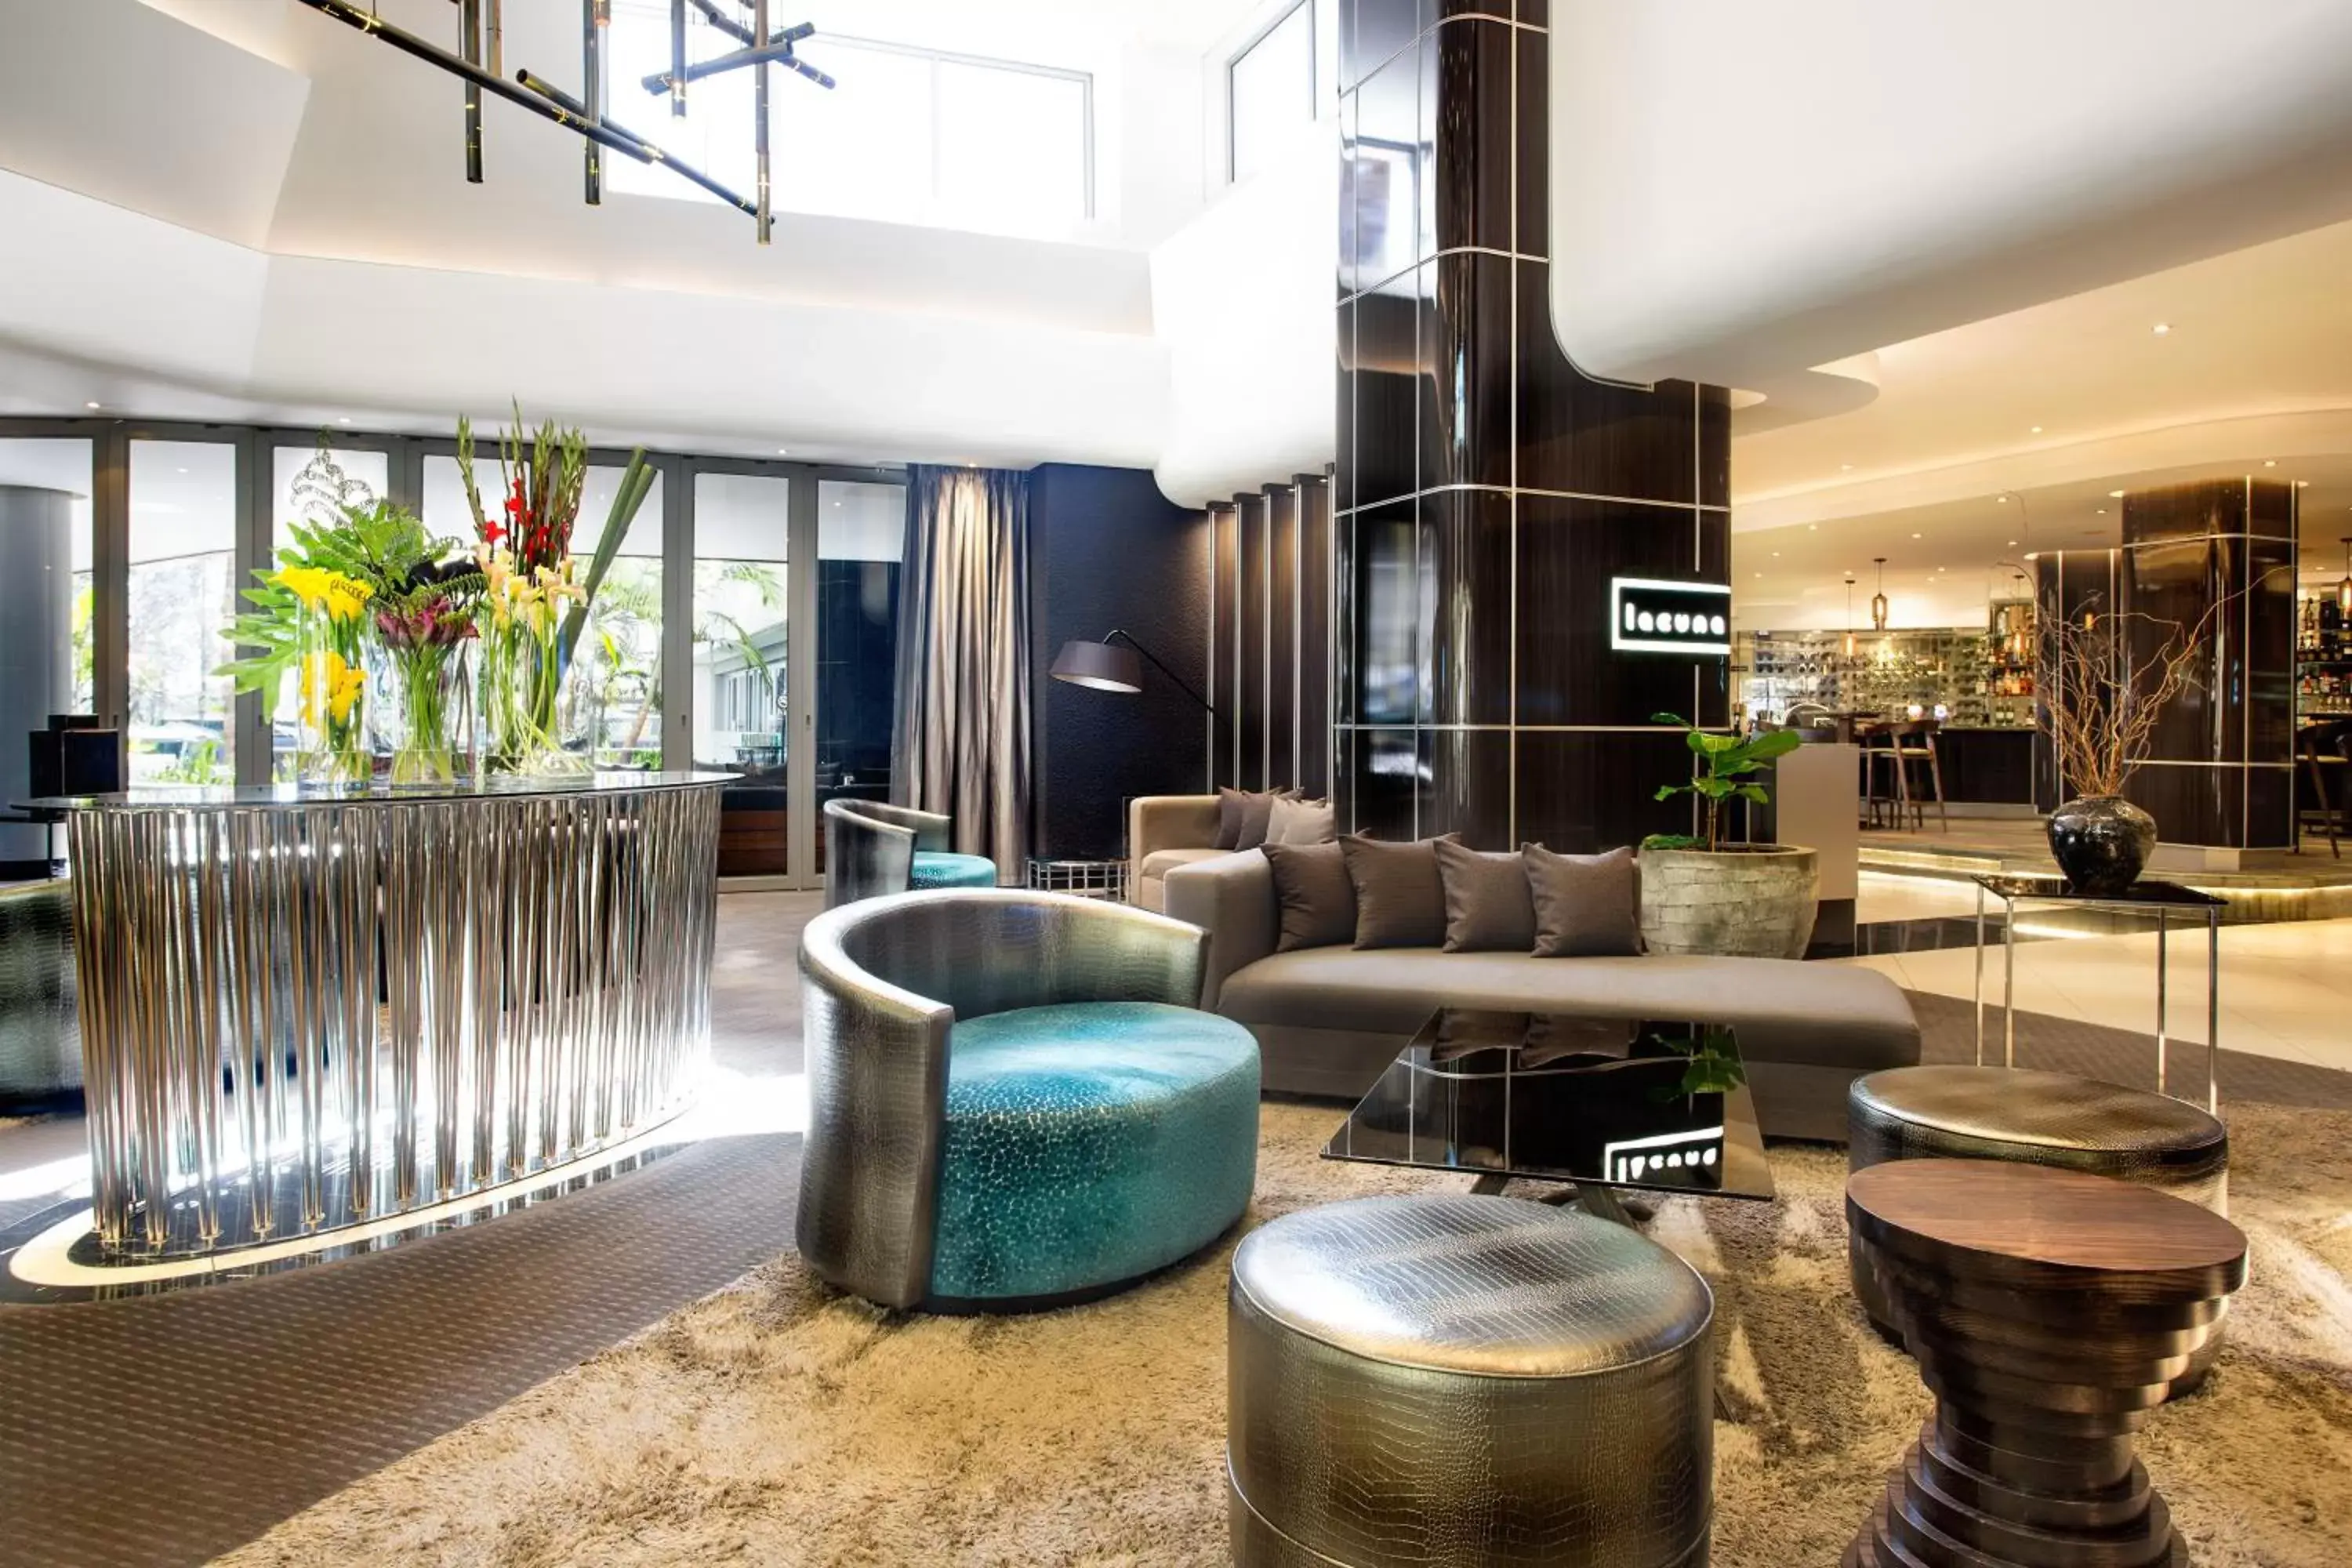 Lobby or reception in The Maslow Hotel, Sandton